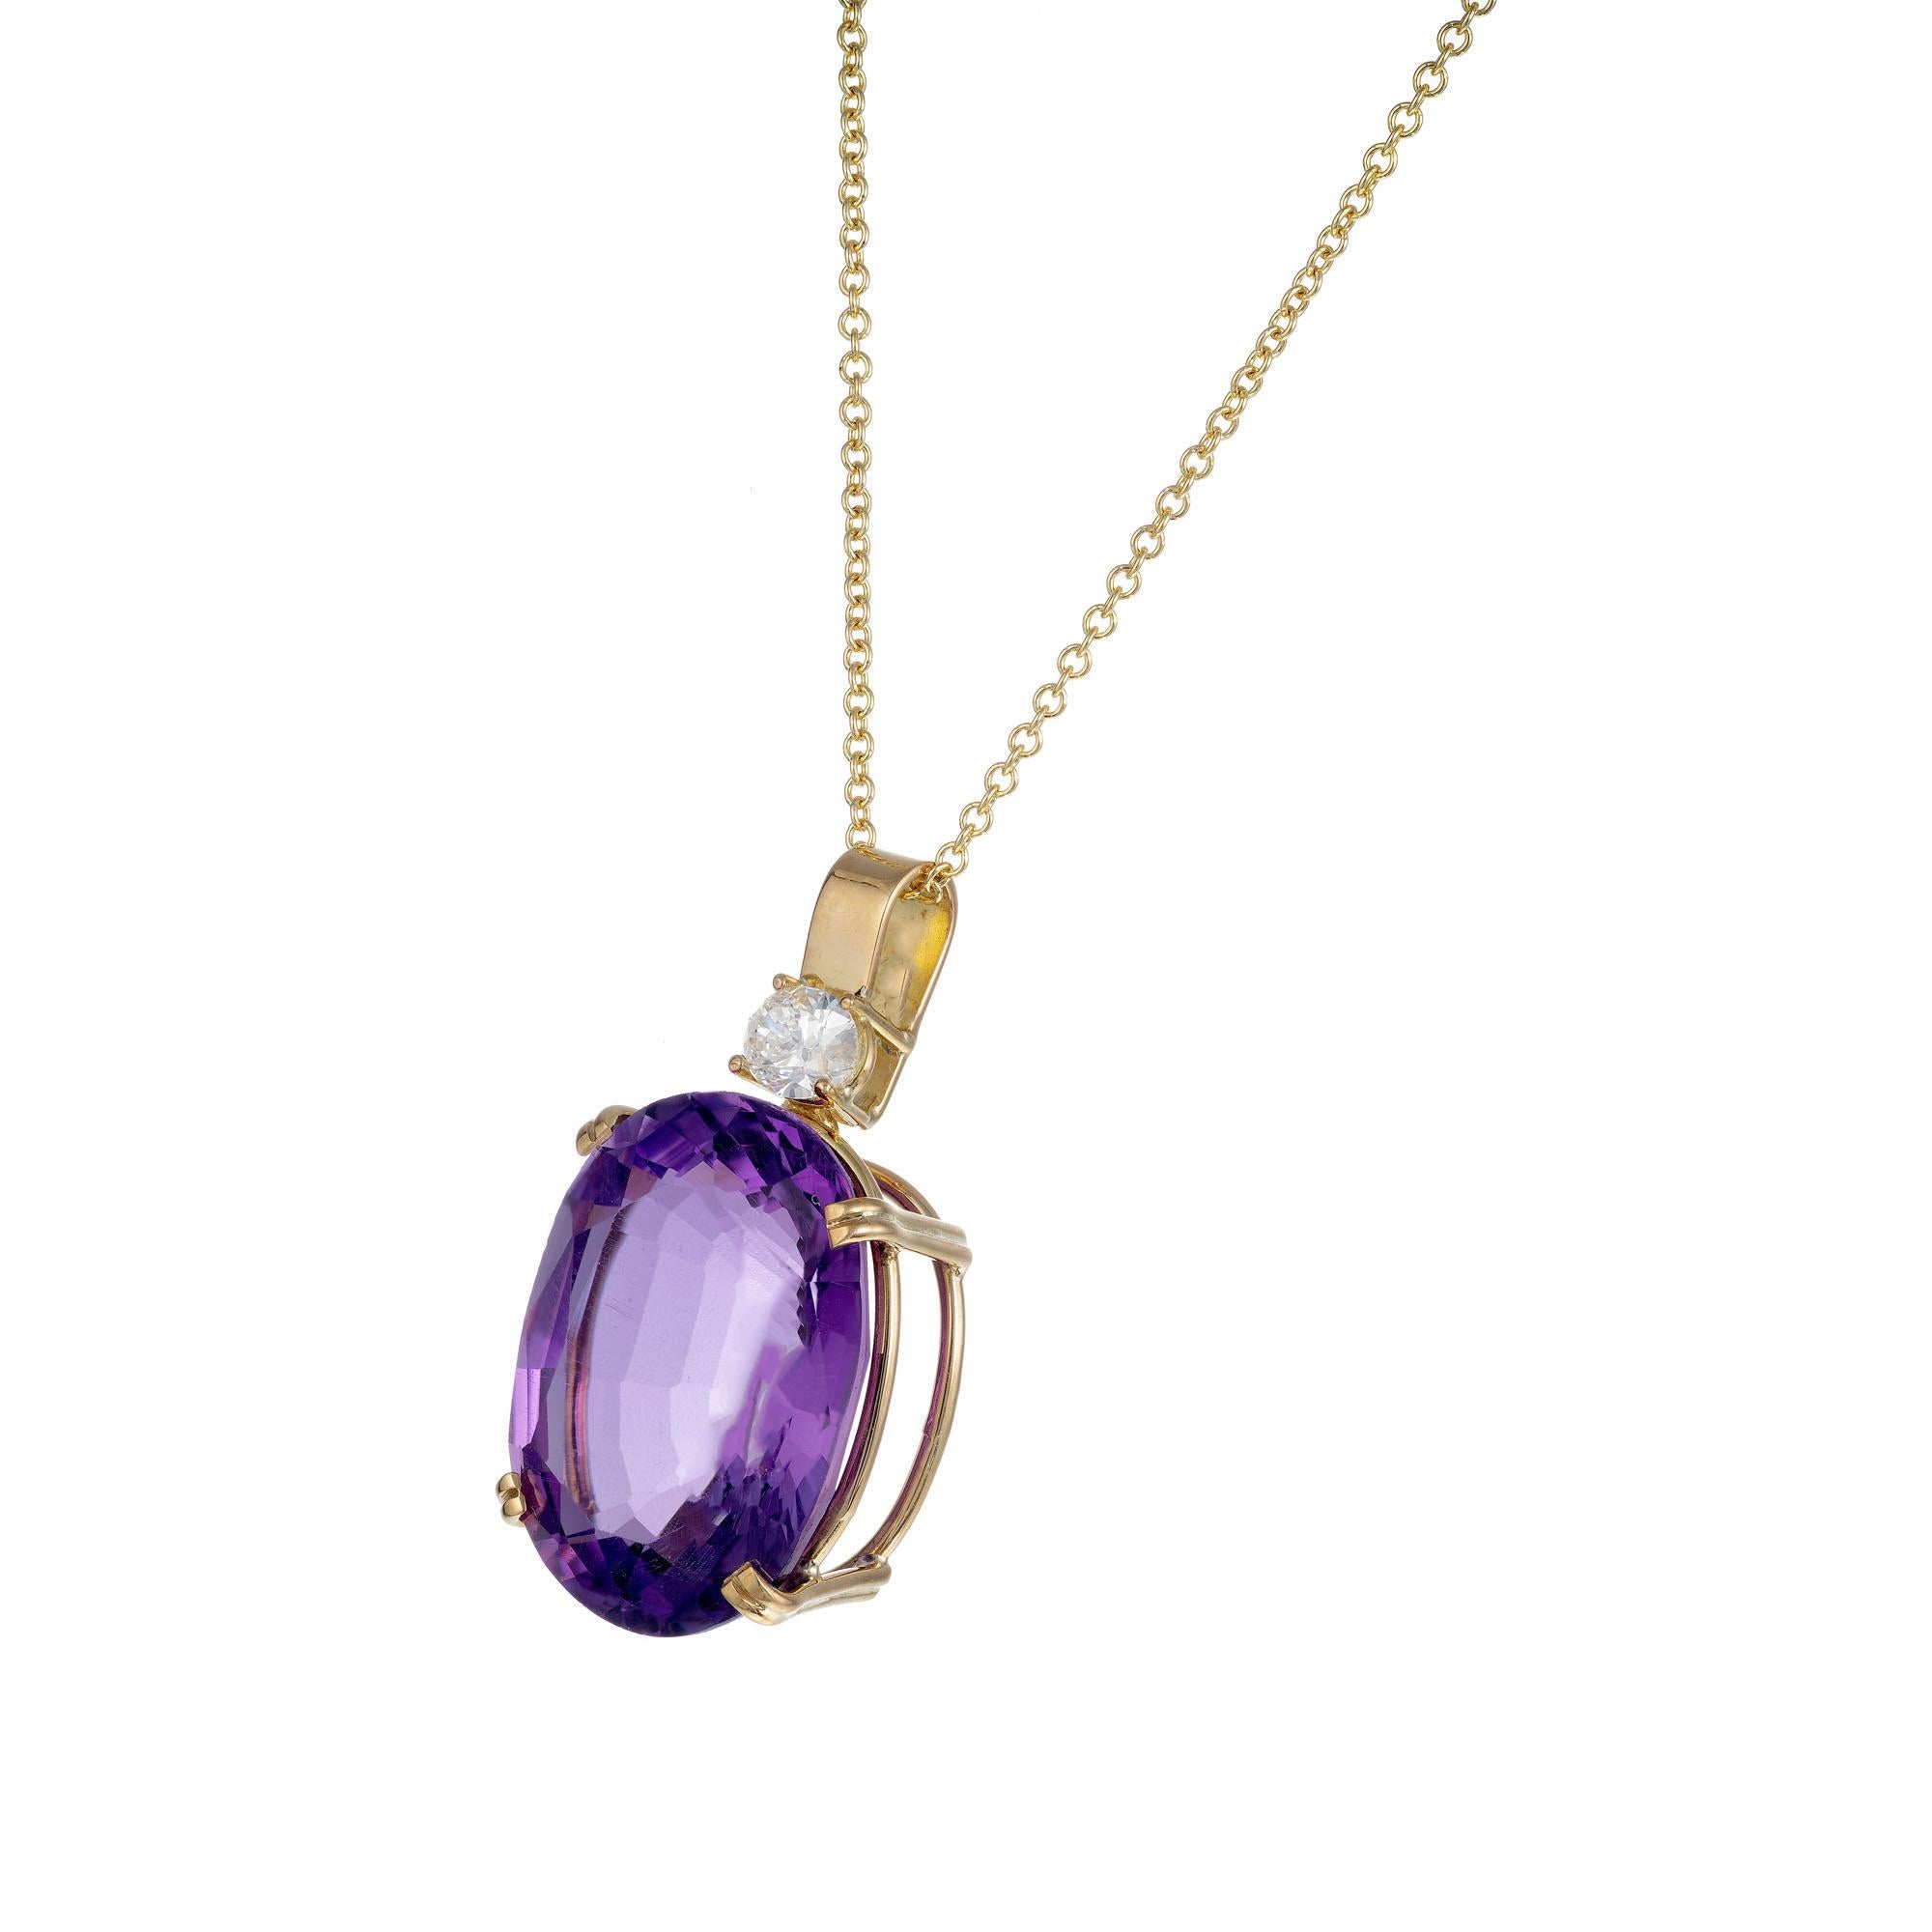 Purple amethyst and diamond pendant necklace. 18.42ct oval amethyst with a round accent diamond on bail, set in 18k yellow gold with a 18 inch chain. Crafted in the Peter Suchy Workshop.  

1 oval purple amethyst approx. 18.42cts
1 round diamond G,